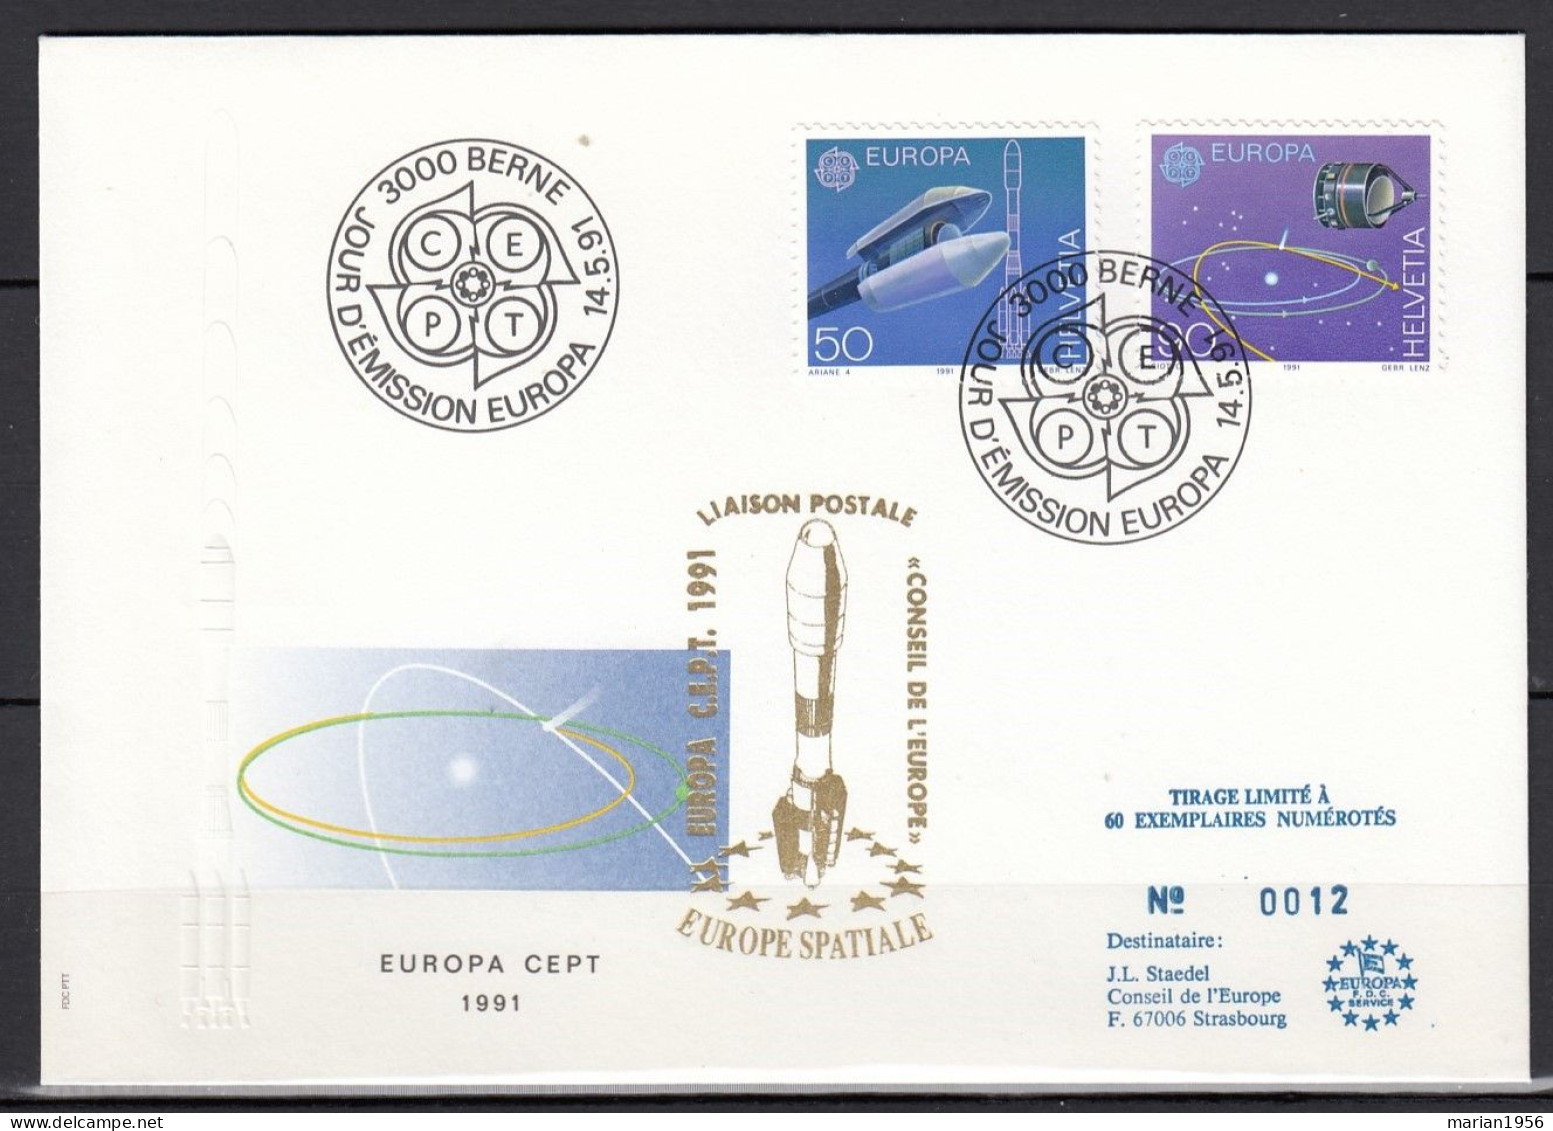 Suisse 1991 - FDC Special - EUROPA CEPT - Europe Spatiale - Tirage Limite A 60 Ex.numerotes - 1991